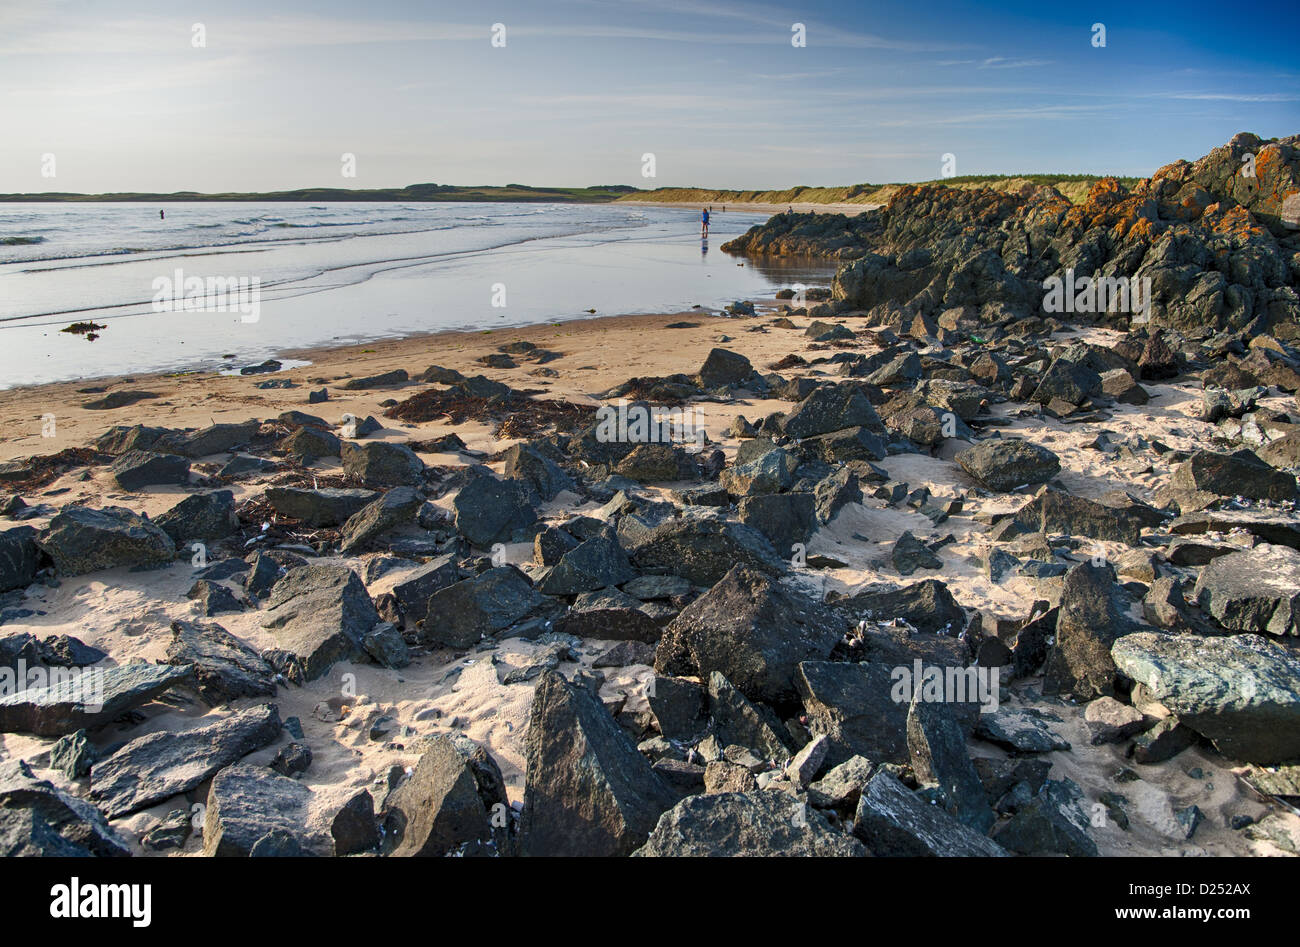 View of rocky beach, Newborough, Anglesey, Wales, August Stock Photo